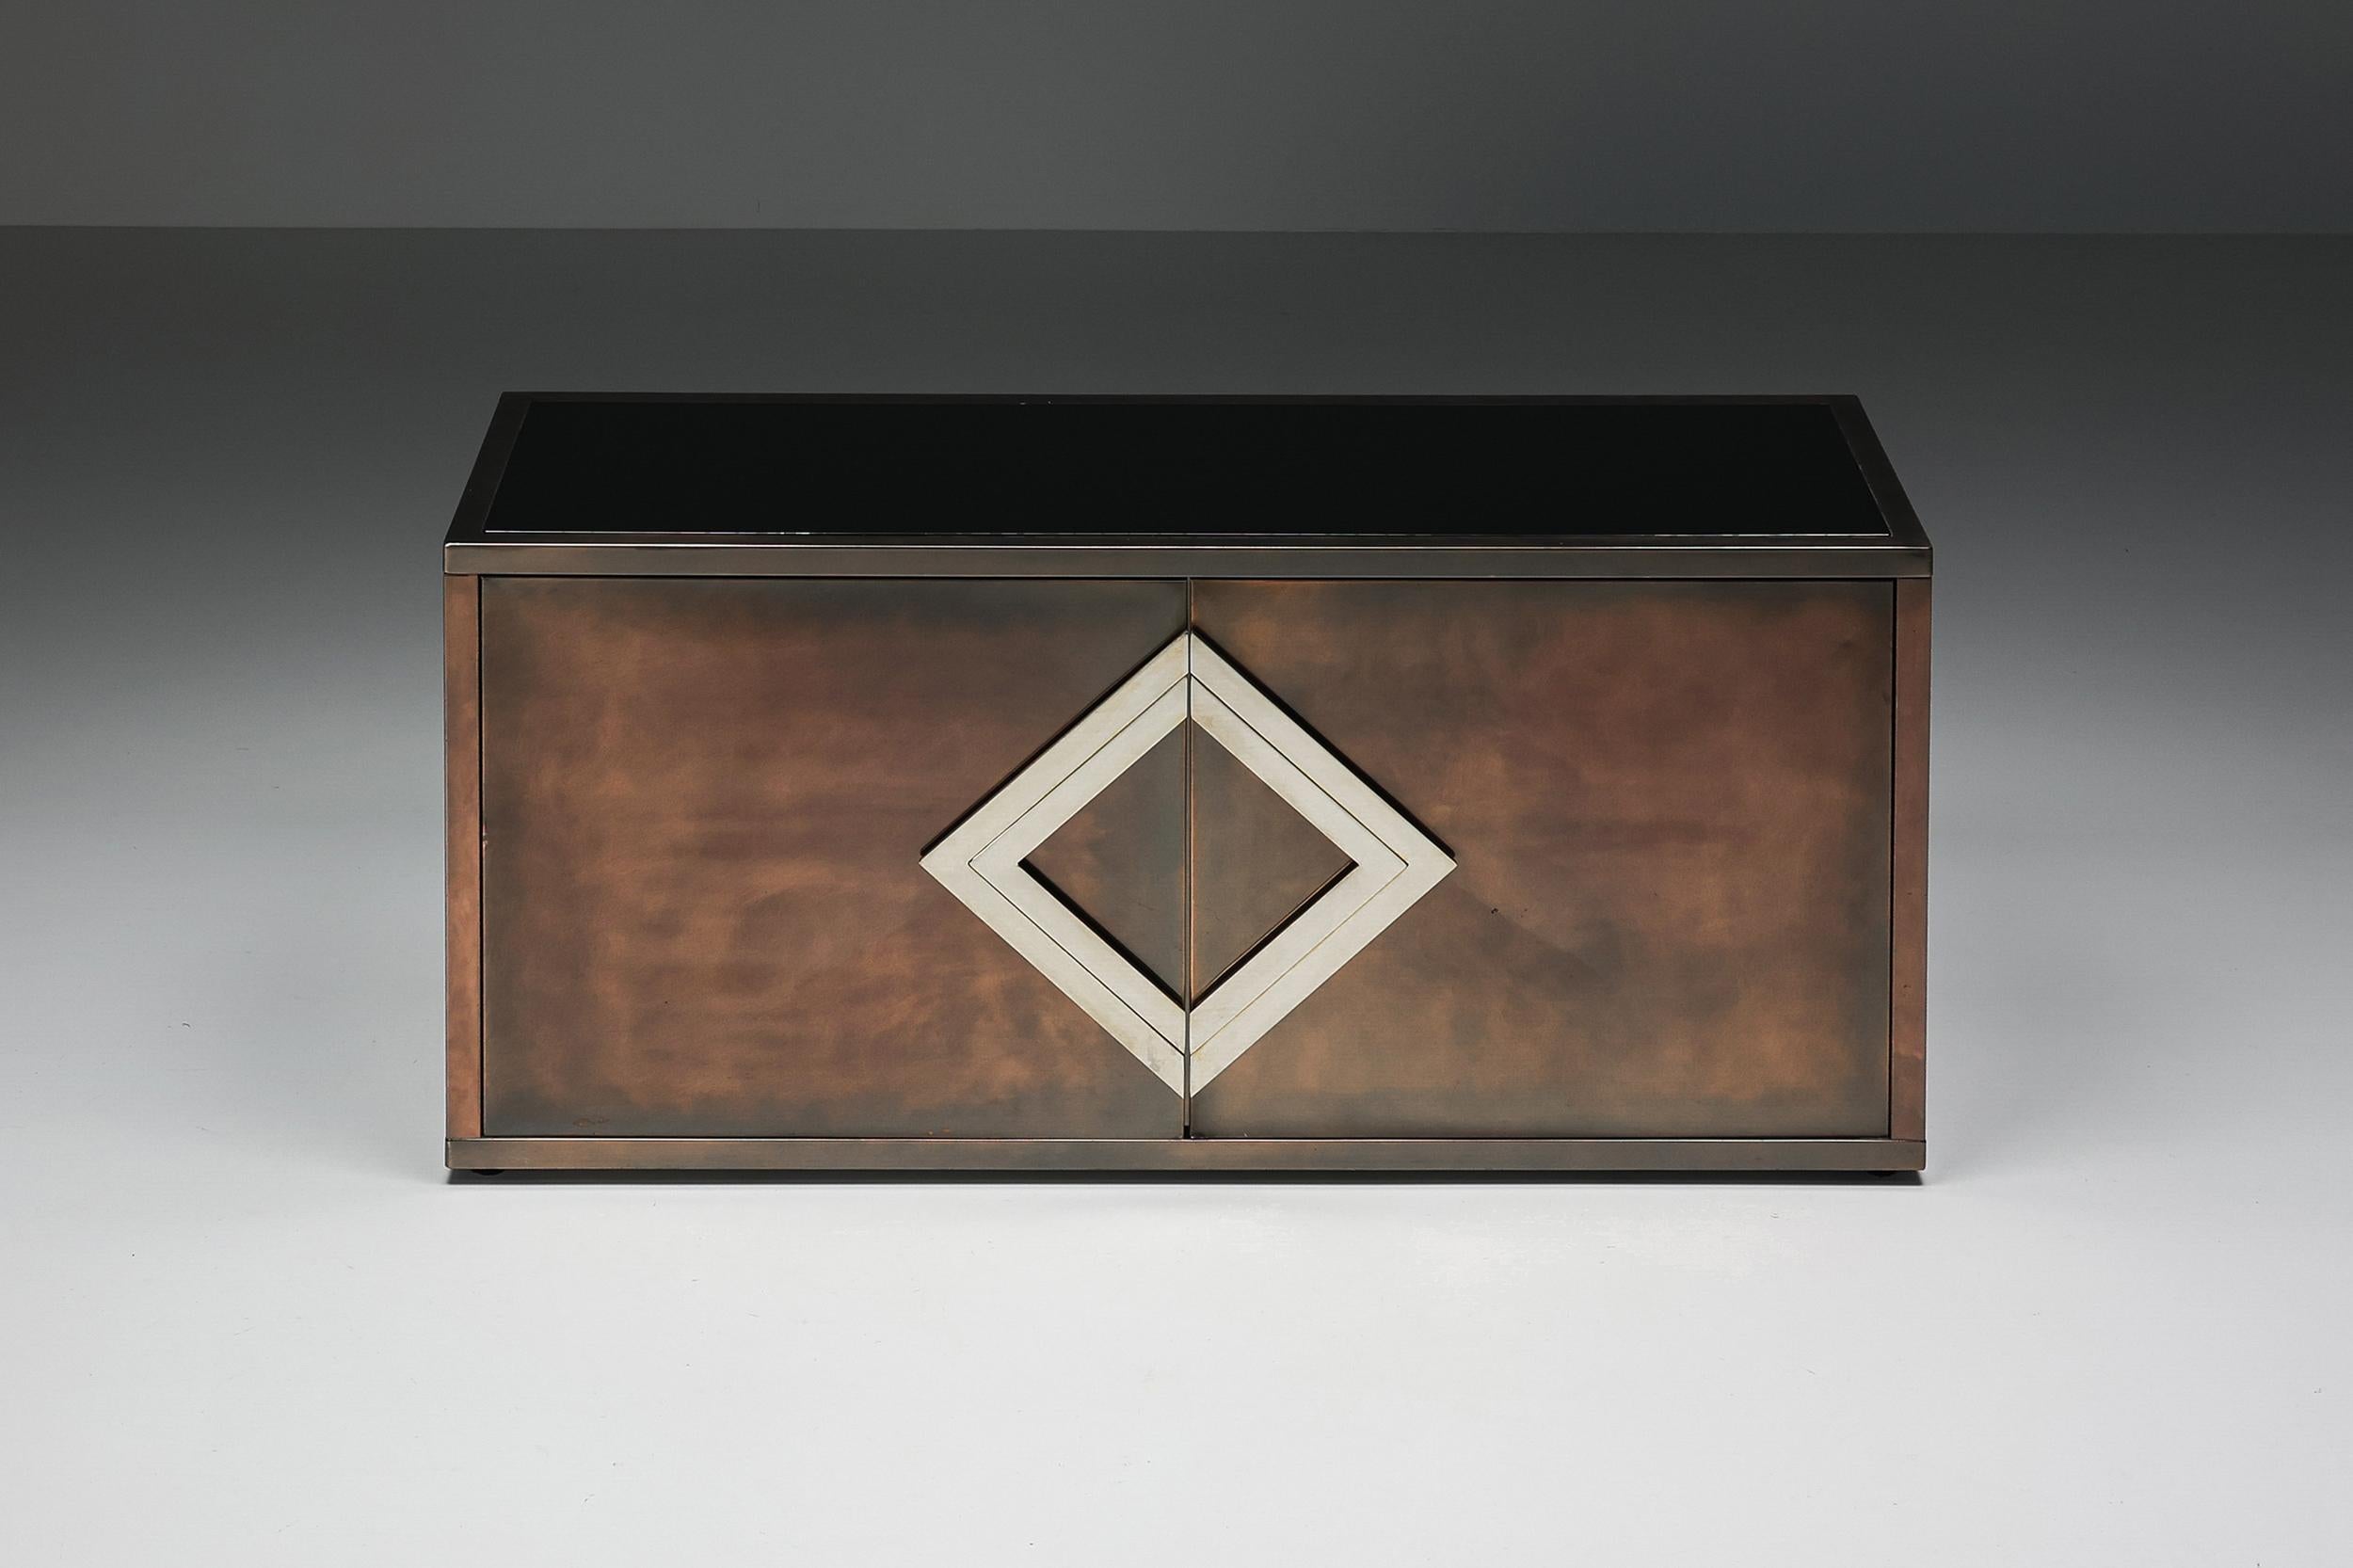 Romeo Rega; Willy Rizzo; Maison Jansen; red copper patinated brass credenza; diamond door handle; Hollywood Regency; France; 1970's

Hollywood regency style sideboard in copper patinated brass made in France in the 1970s. This unique top is in